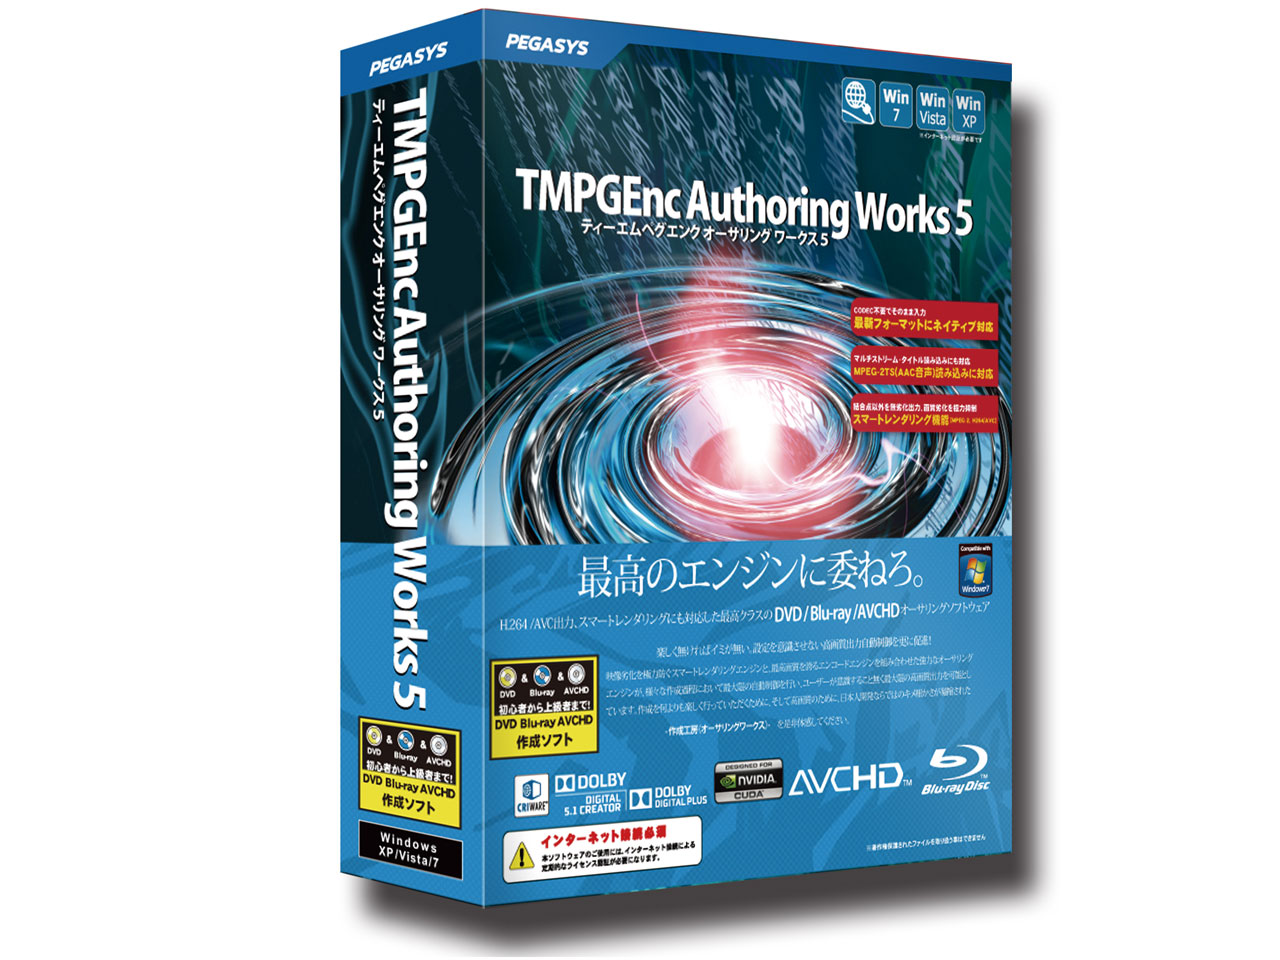 Tmpgenc Authoring Works 5 Downloads Music